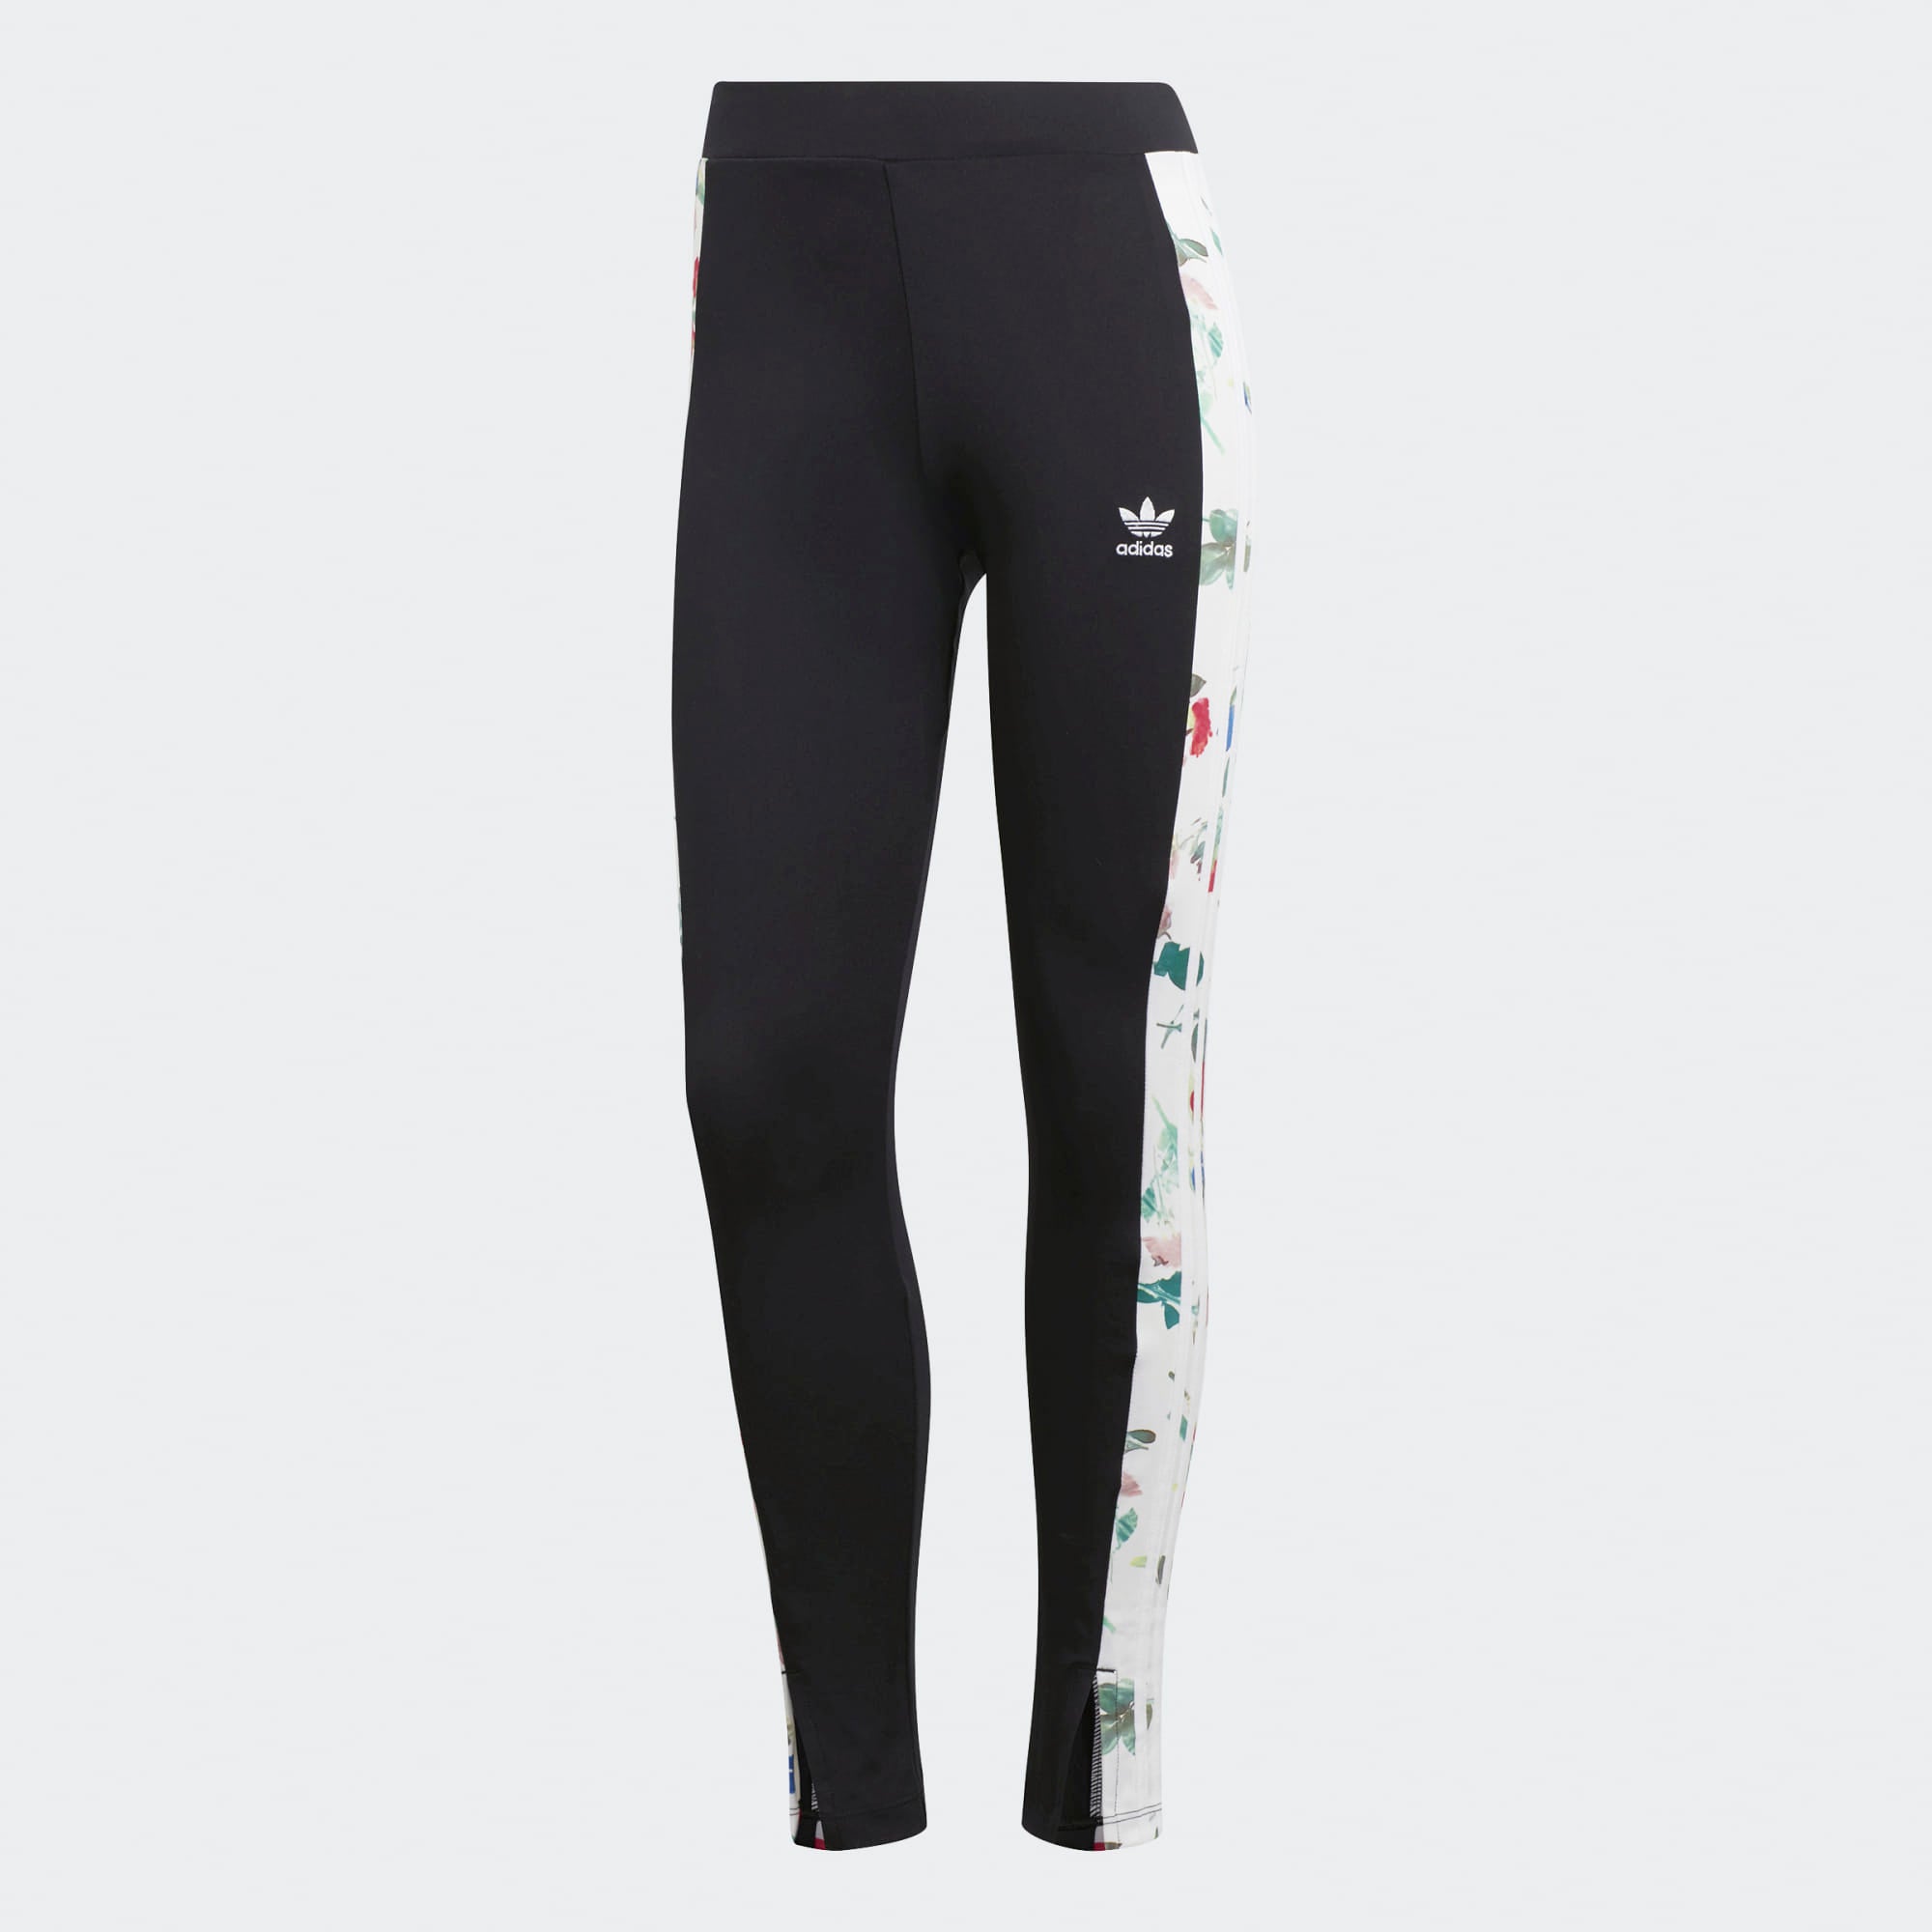 adidas Floral Running Tights in Black